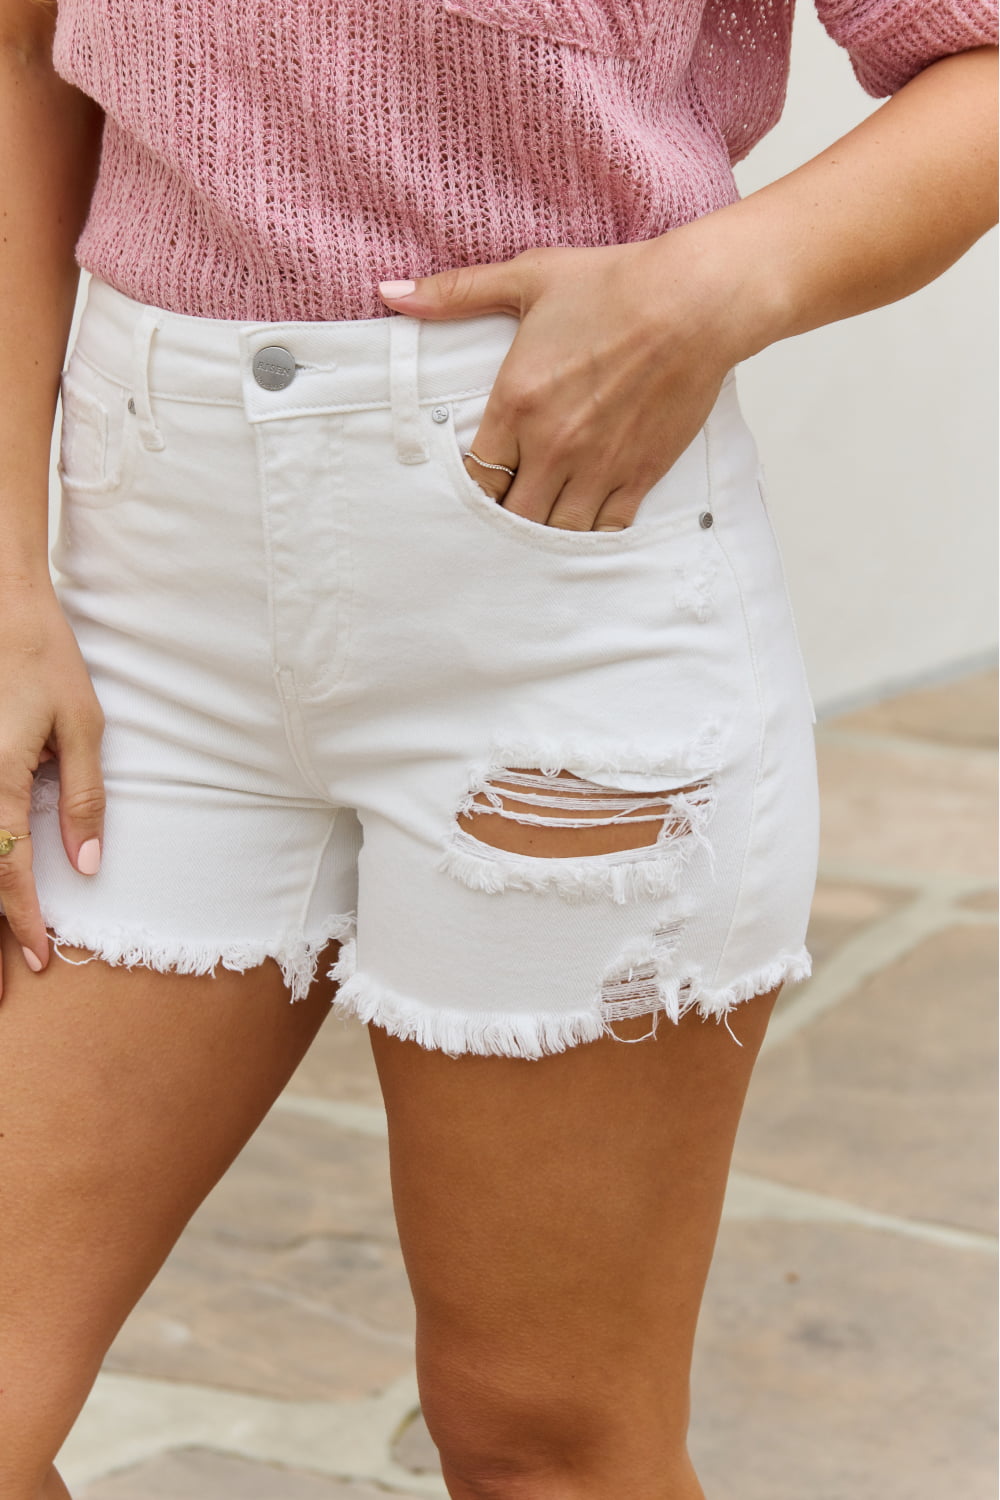 RISEN Lily High Waisted Distressed Shorts- ONLINE ONLY 2-10 DAY SHIPPING